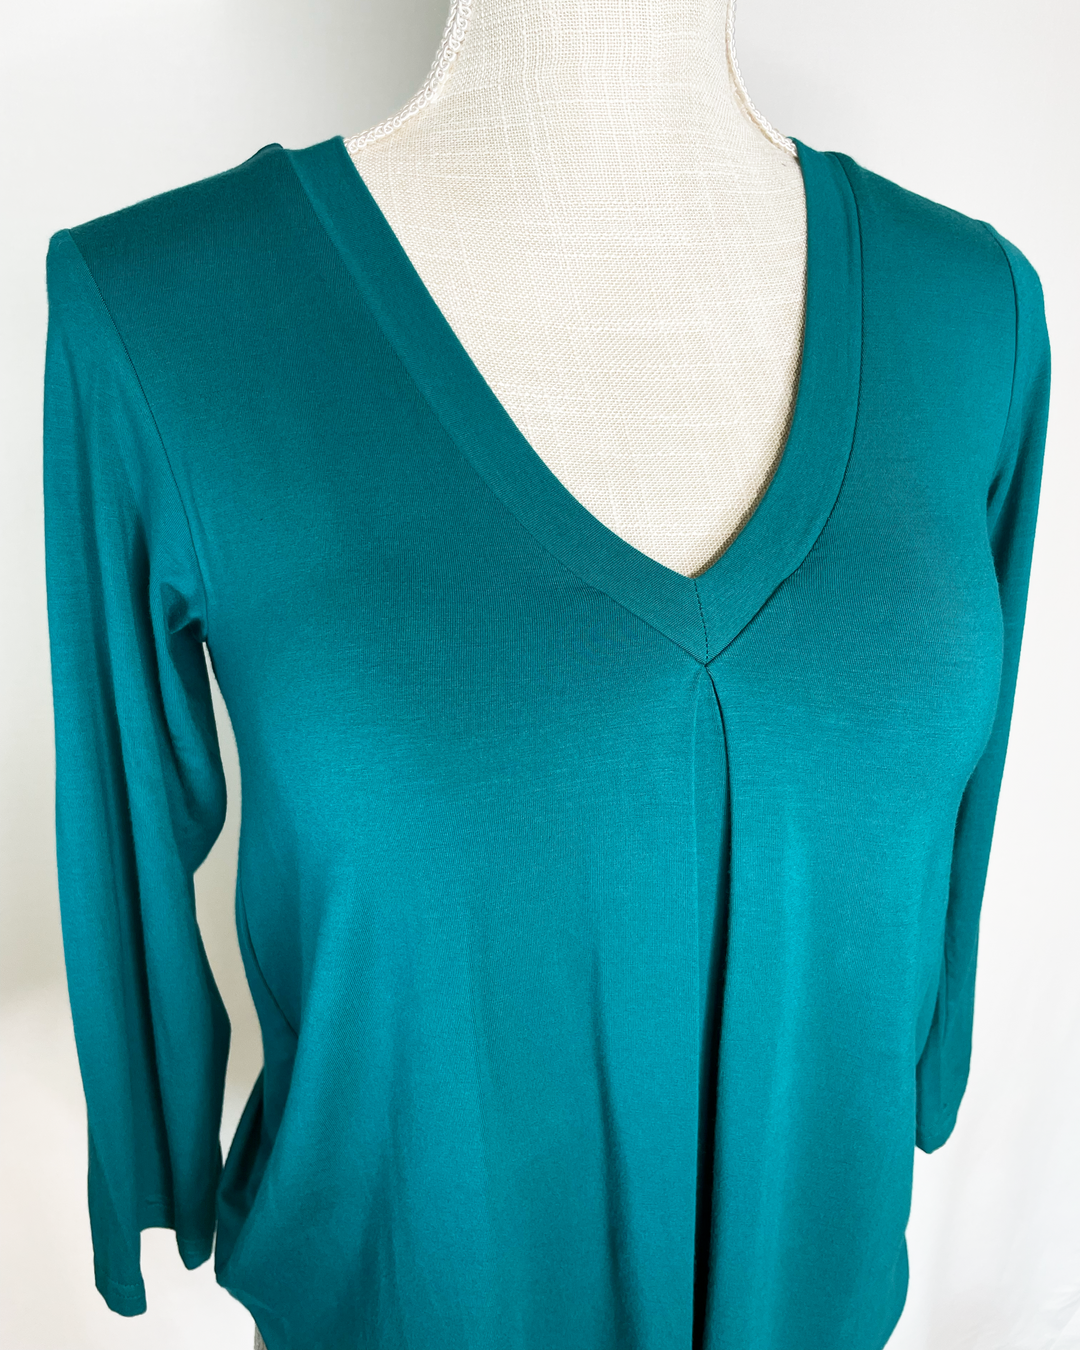 EILEEN V-Pleat Braless Bamboo 3/4 Sleeve Top side view - Teal color